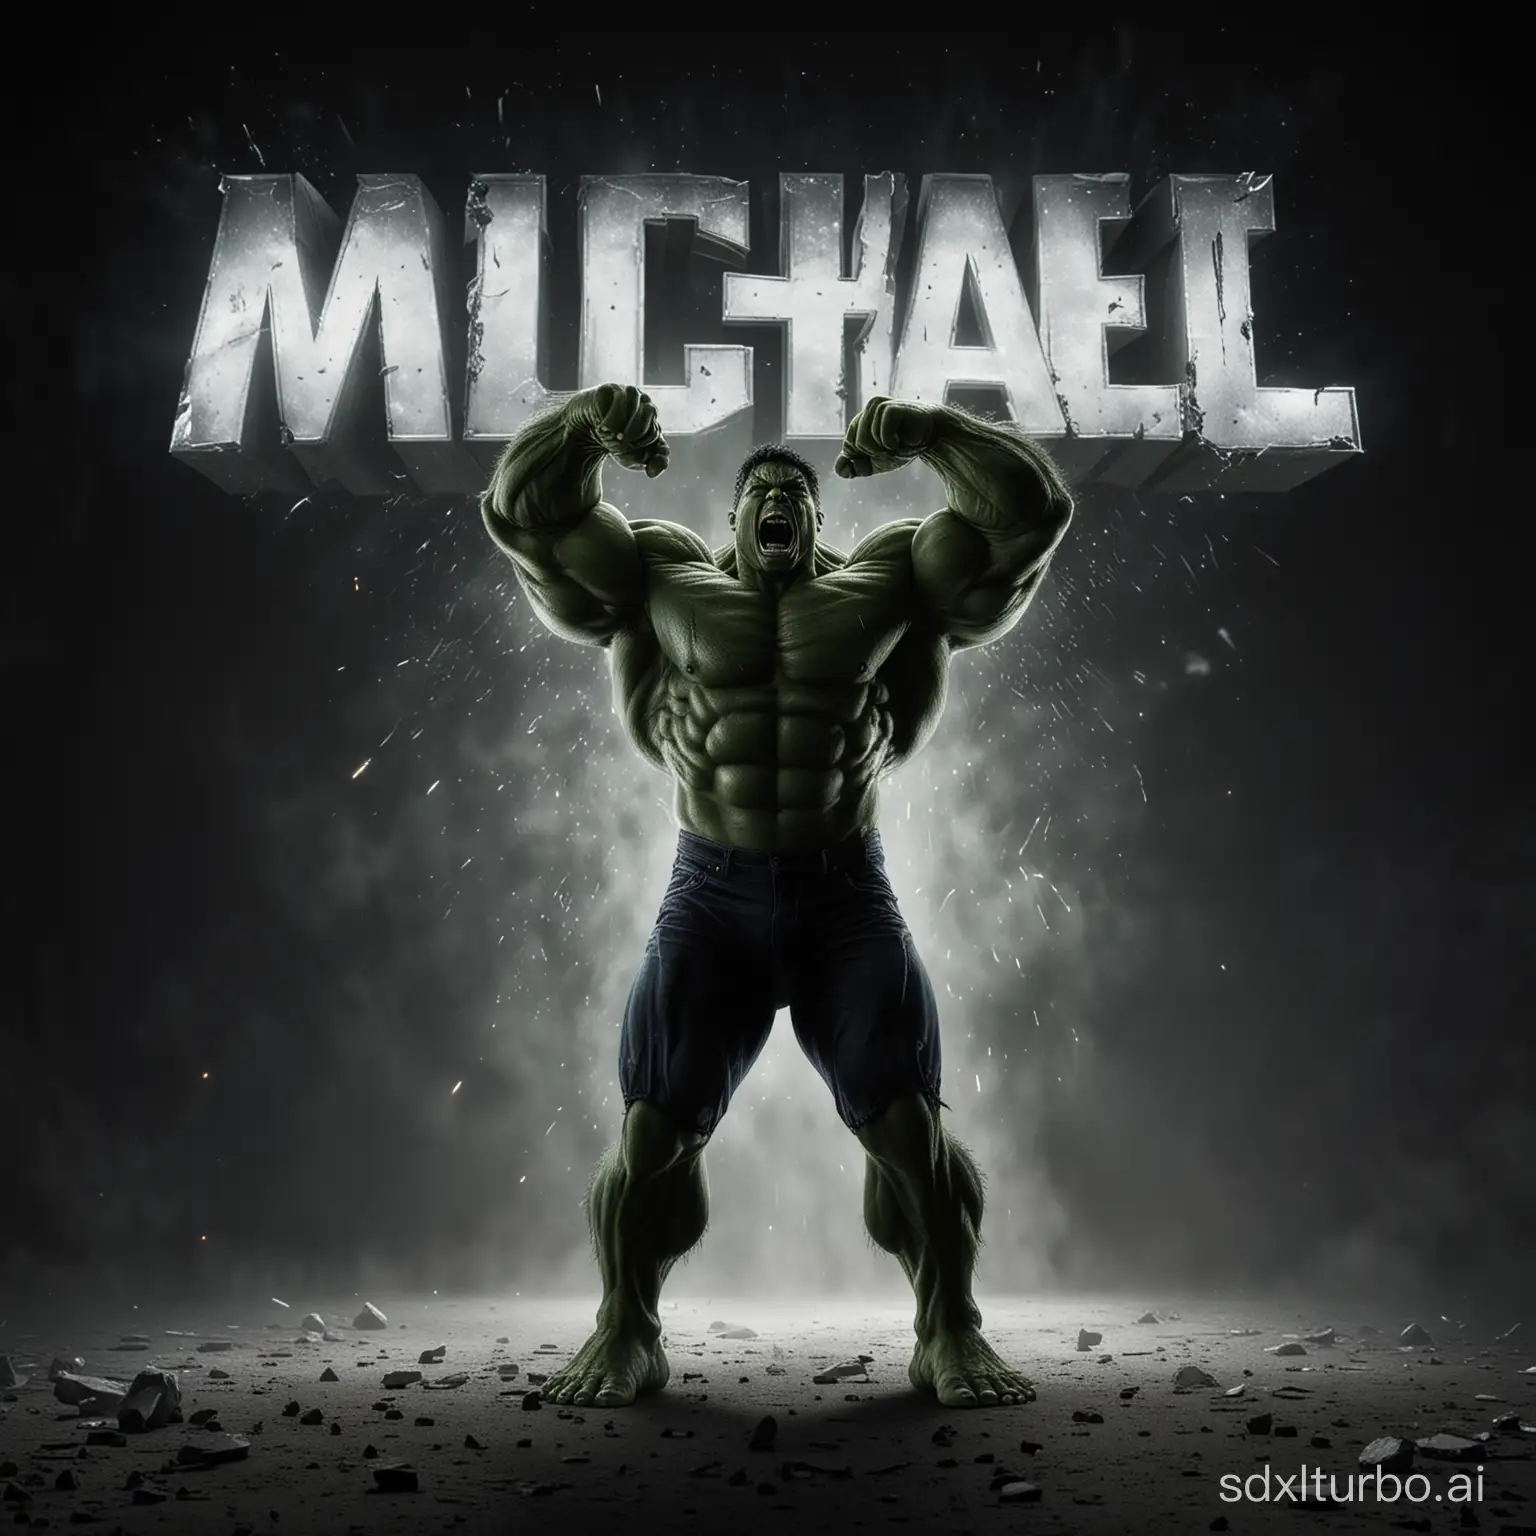 "Michael" as a glowing headline, a person in the form of Hulk stands in the middle of the picture and looks up at the text, screaming, tantrum, 4k, photorealistic, cinematic lighting, black background